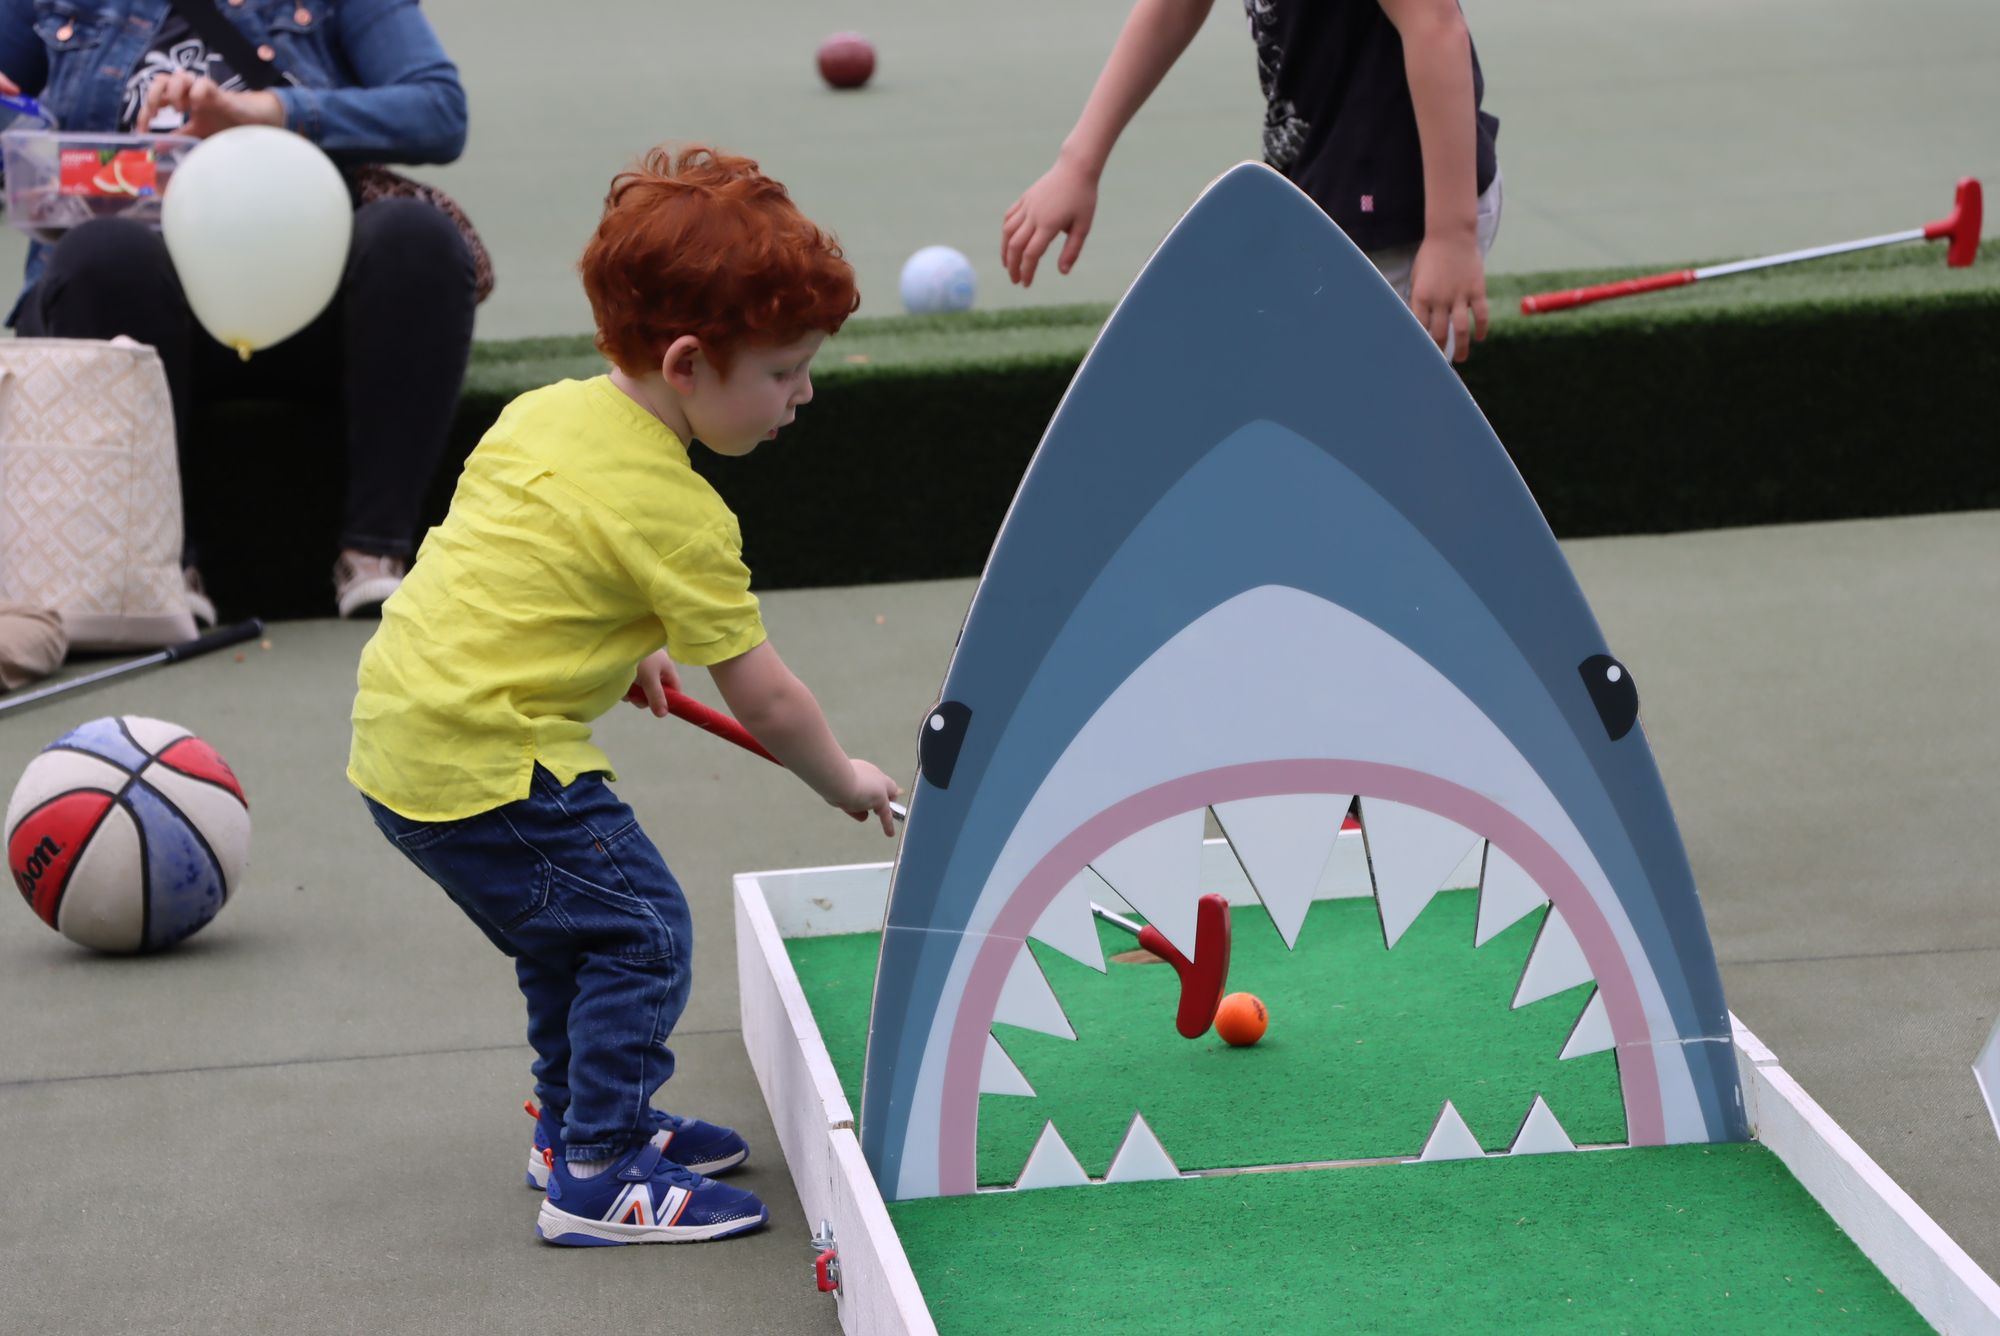 A boy with red hair and a yellow t-shirt plays mini-golf on a shark-themed putting green. He is pictured side on.